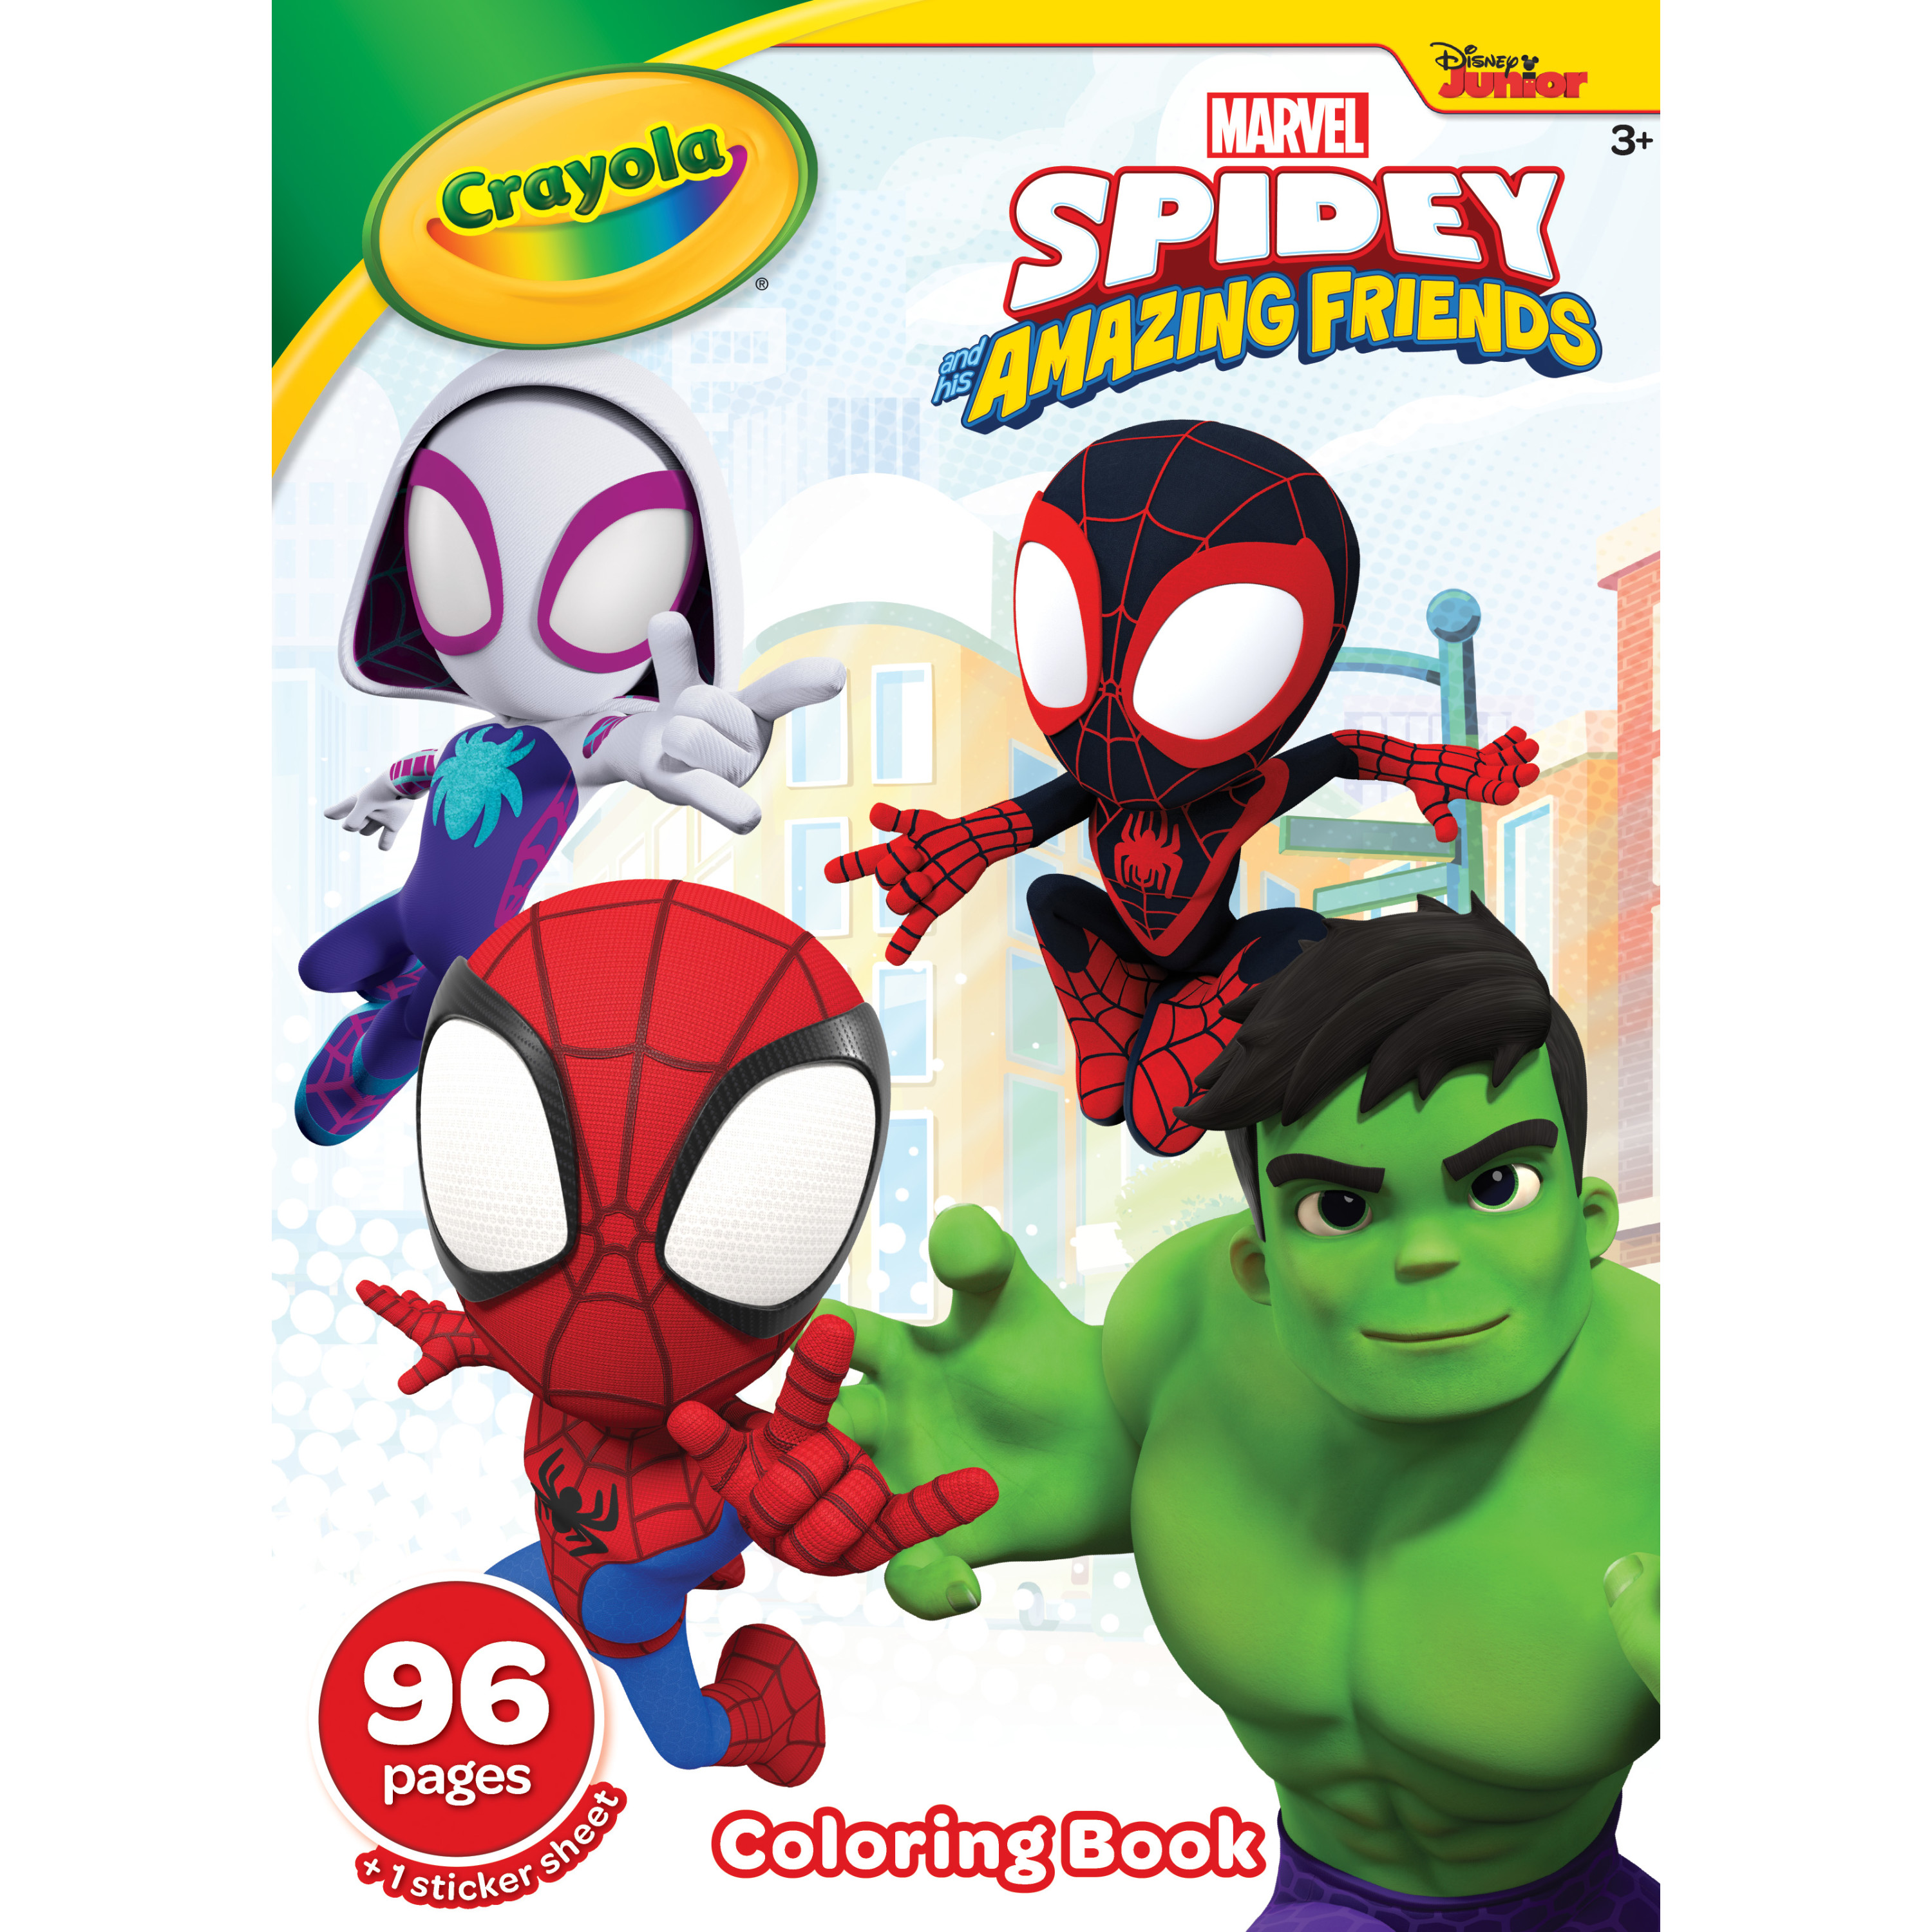 Crayola Spiderman Coloring Book with Stickers, 96 Pages, Gift for Kids